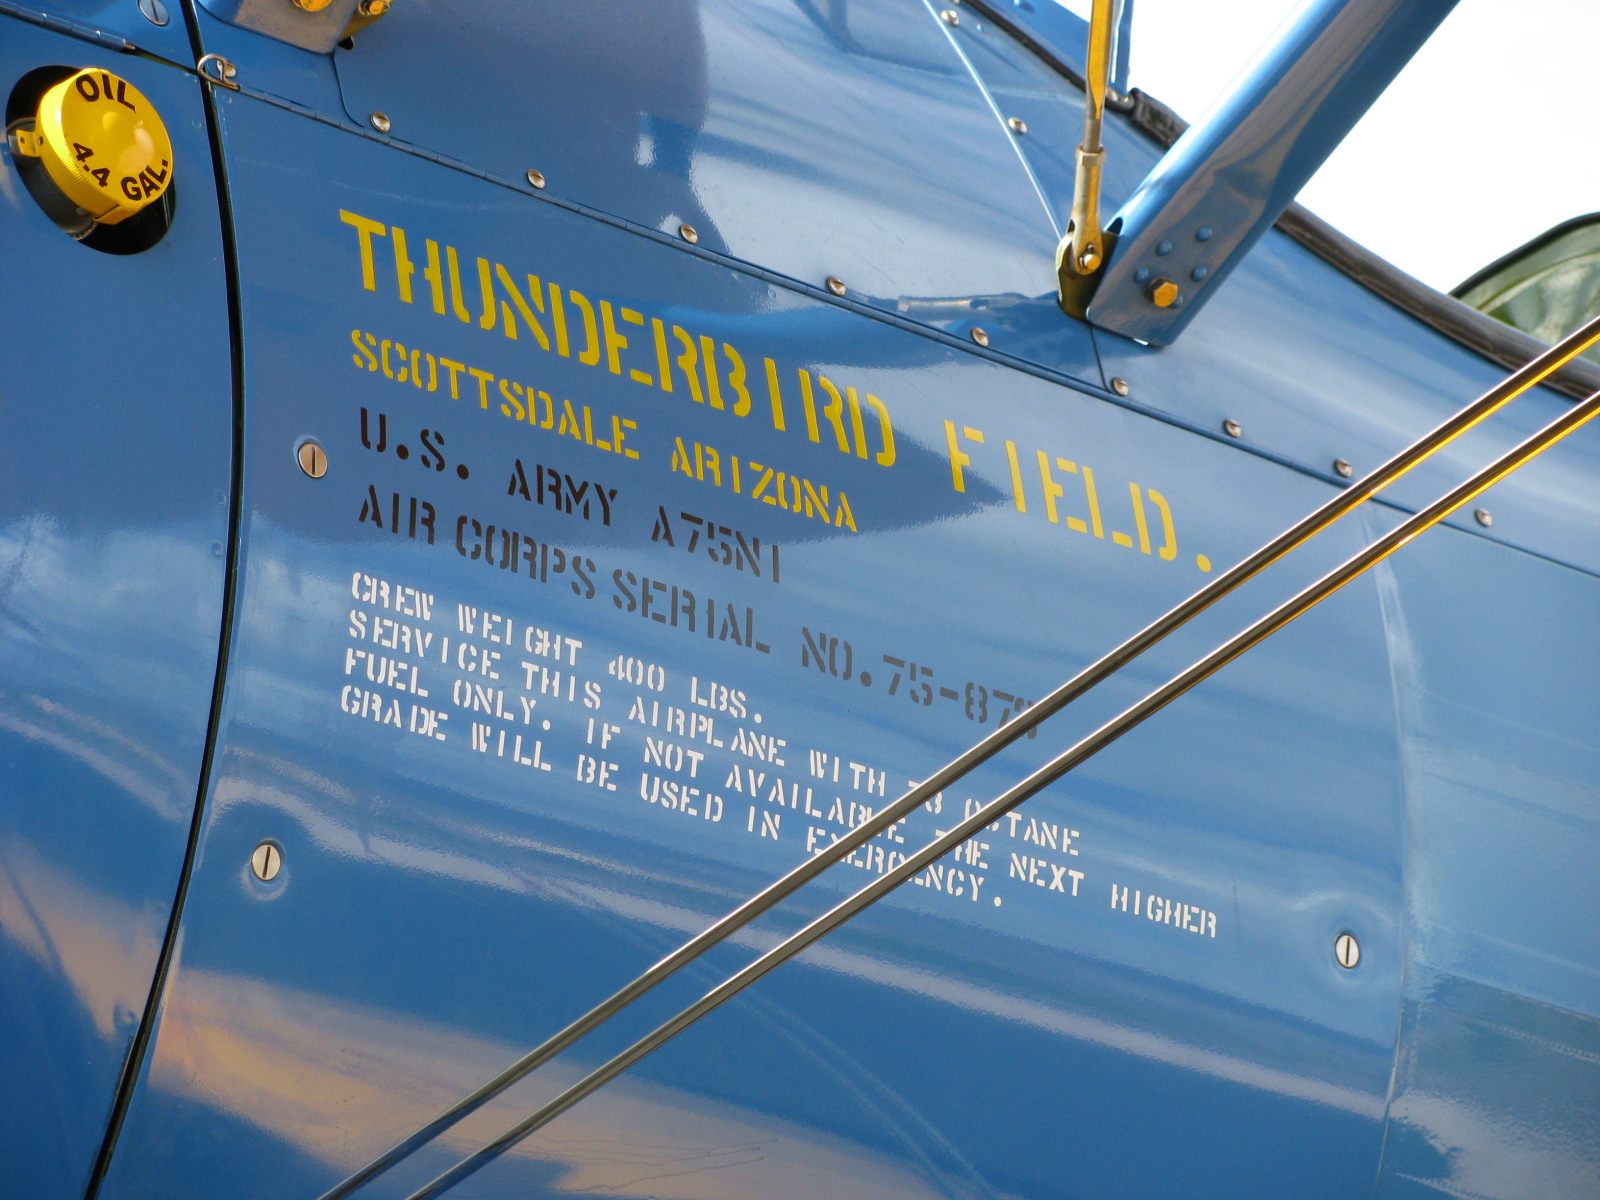 close up of stearman biplane with the words thunderbird field